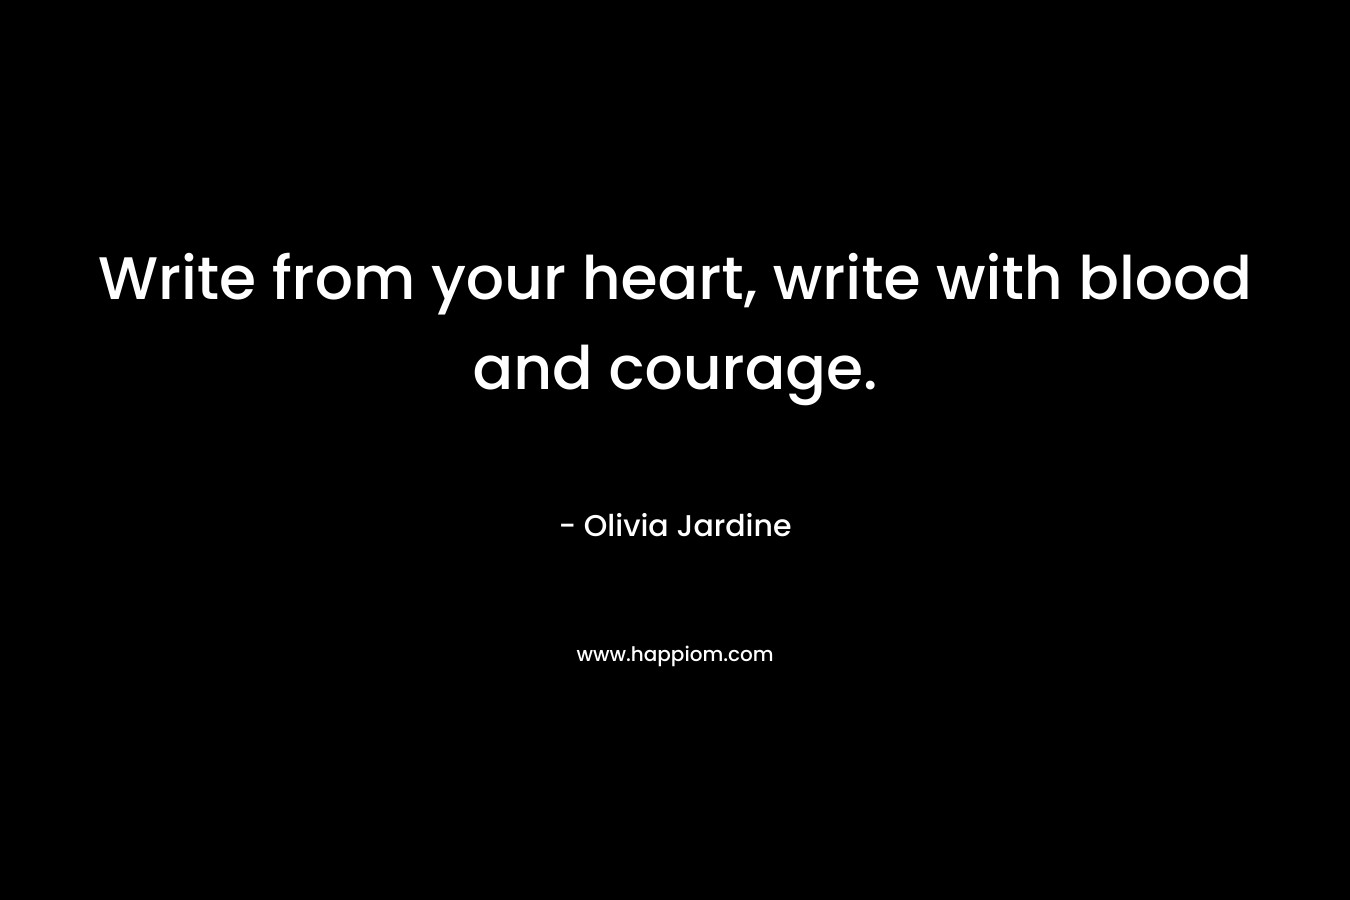 Write from your heart, write with blood and courage. – Olivia Jardine